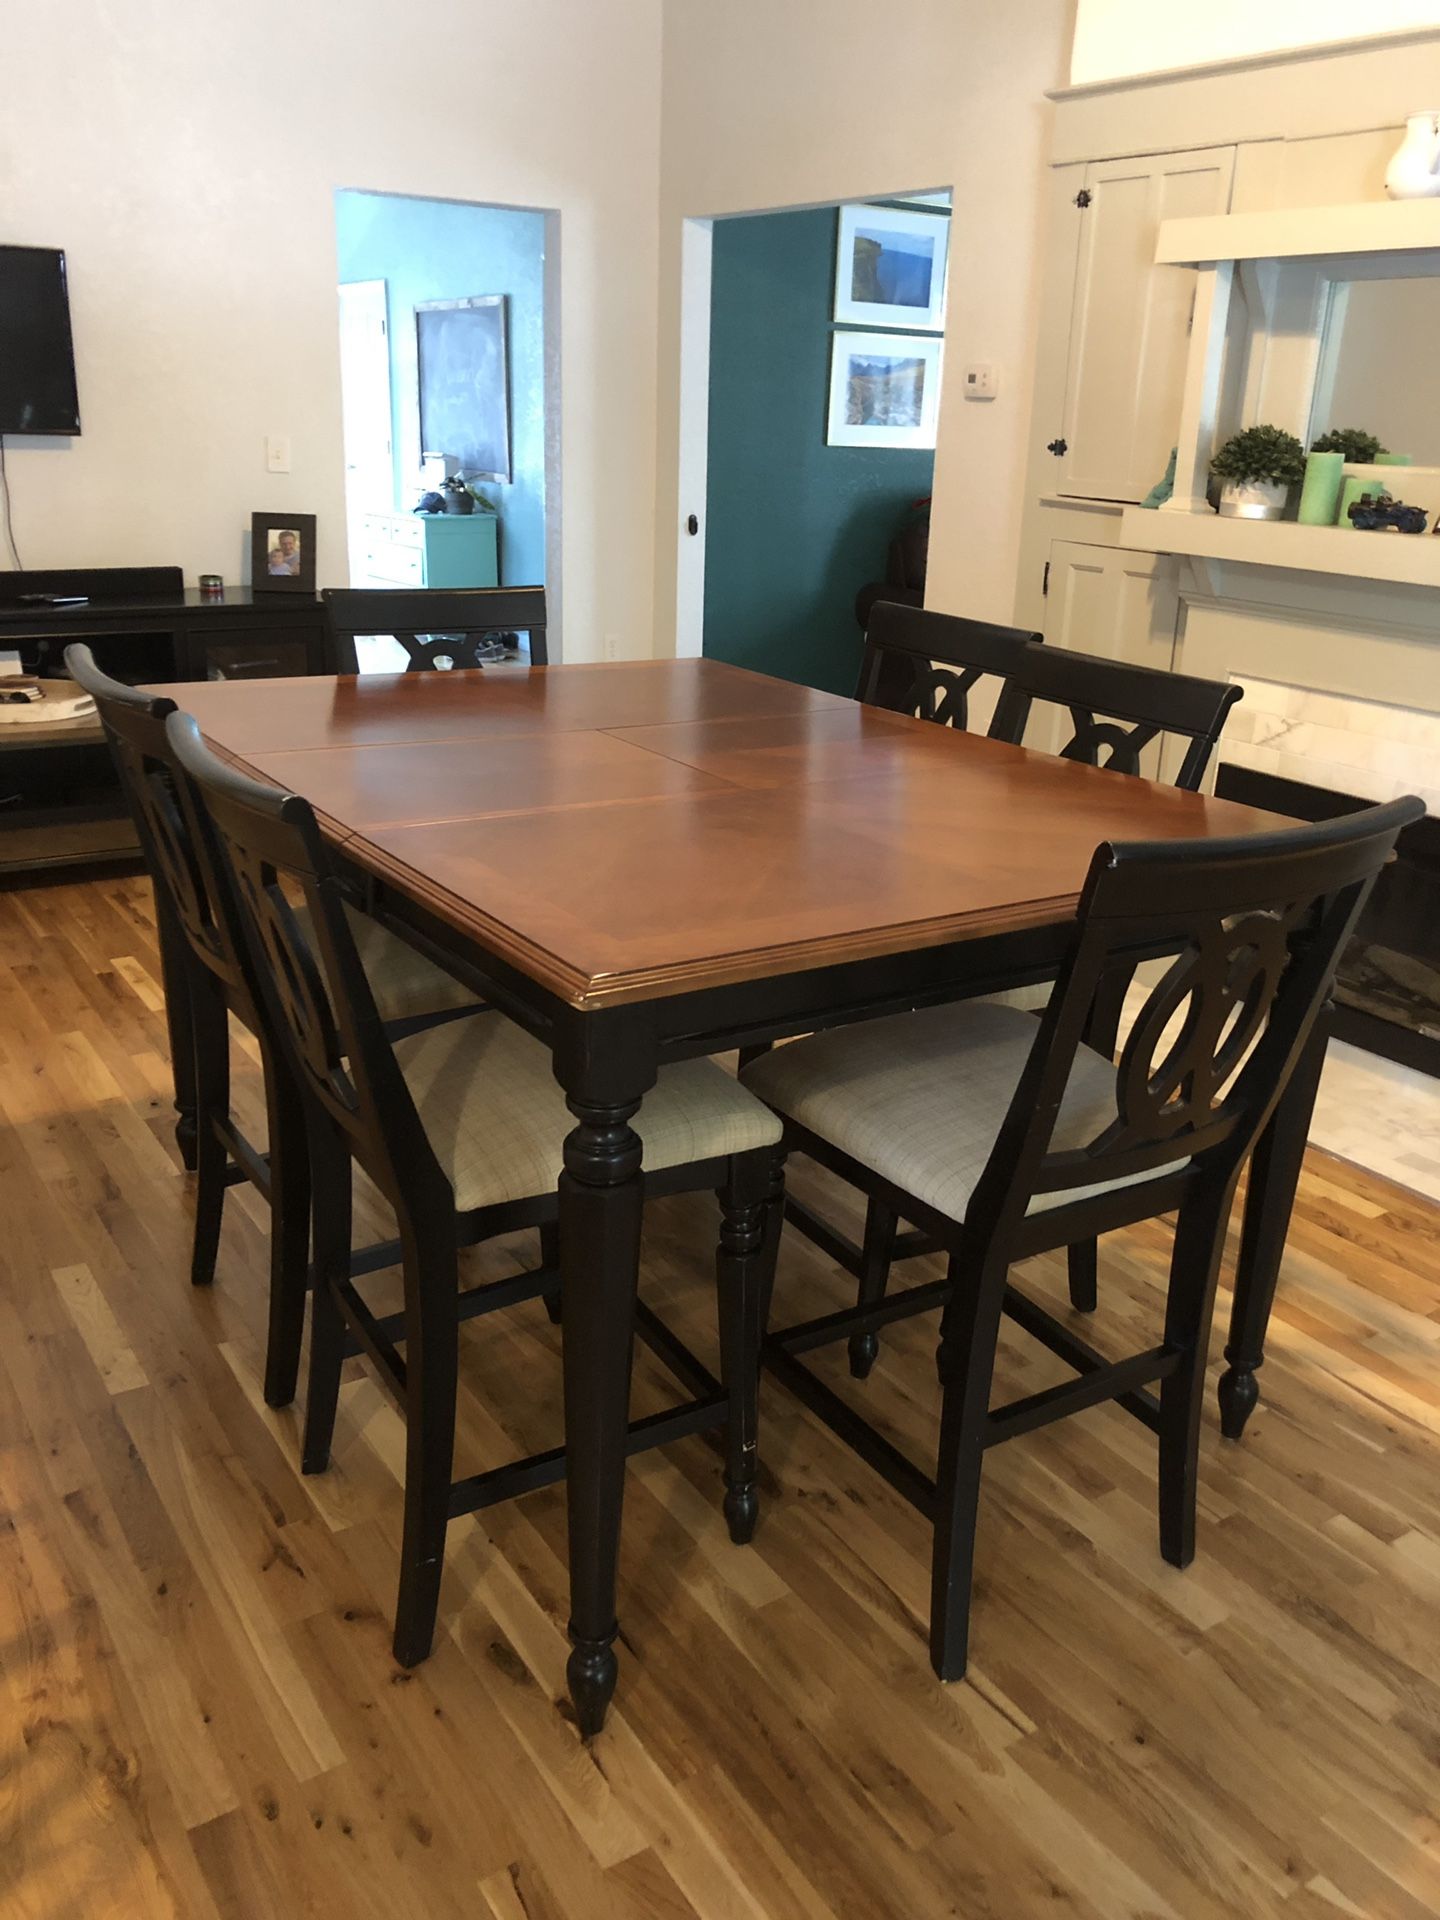 Counter height dining room table.